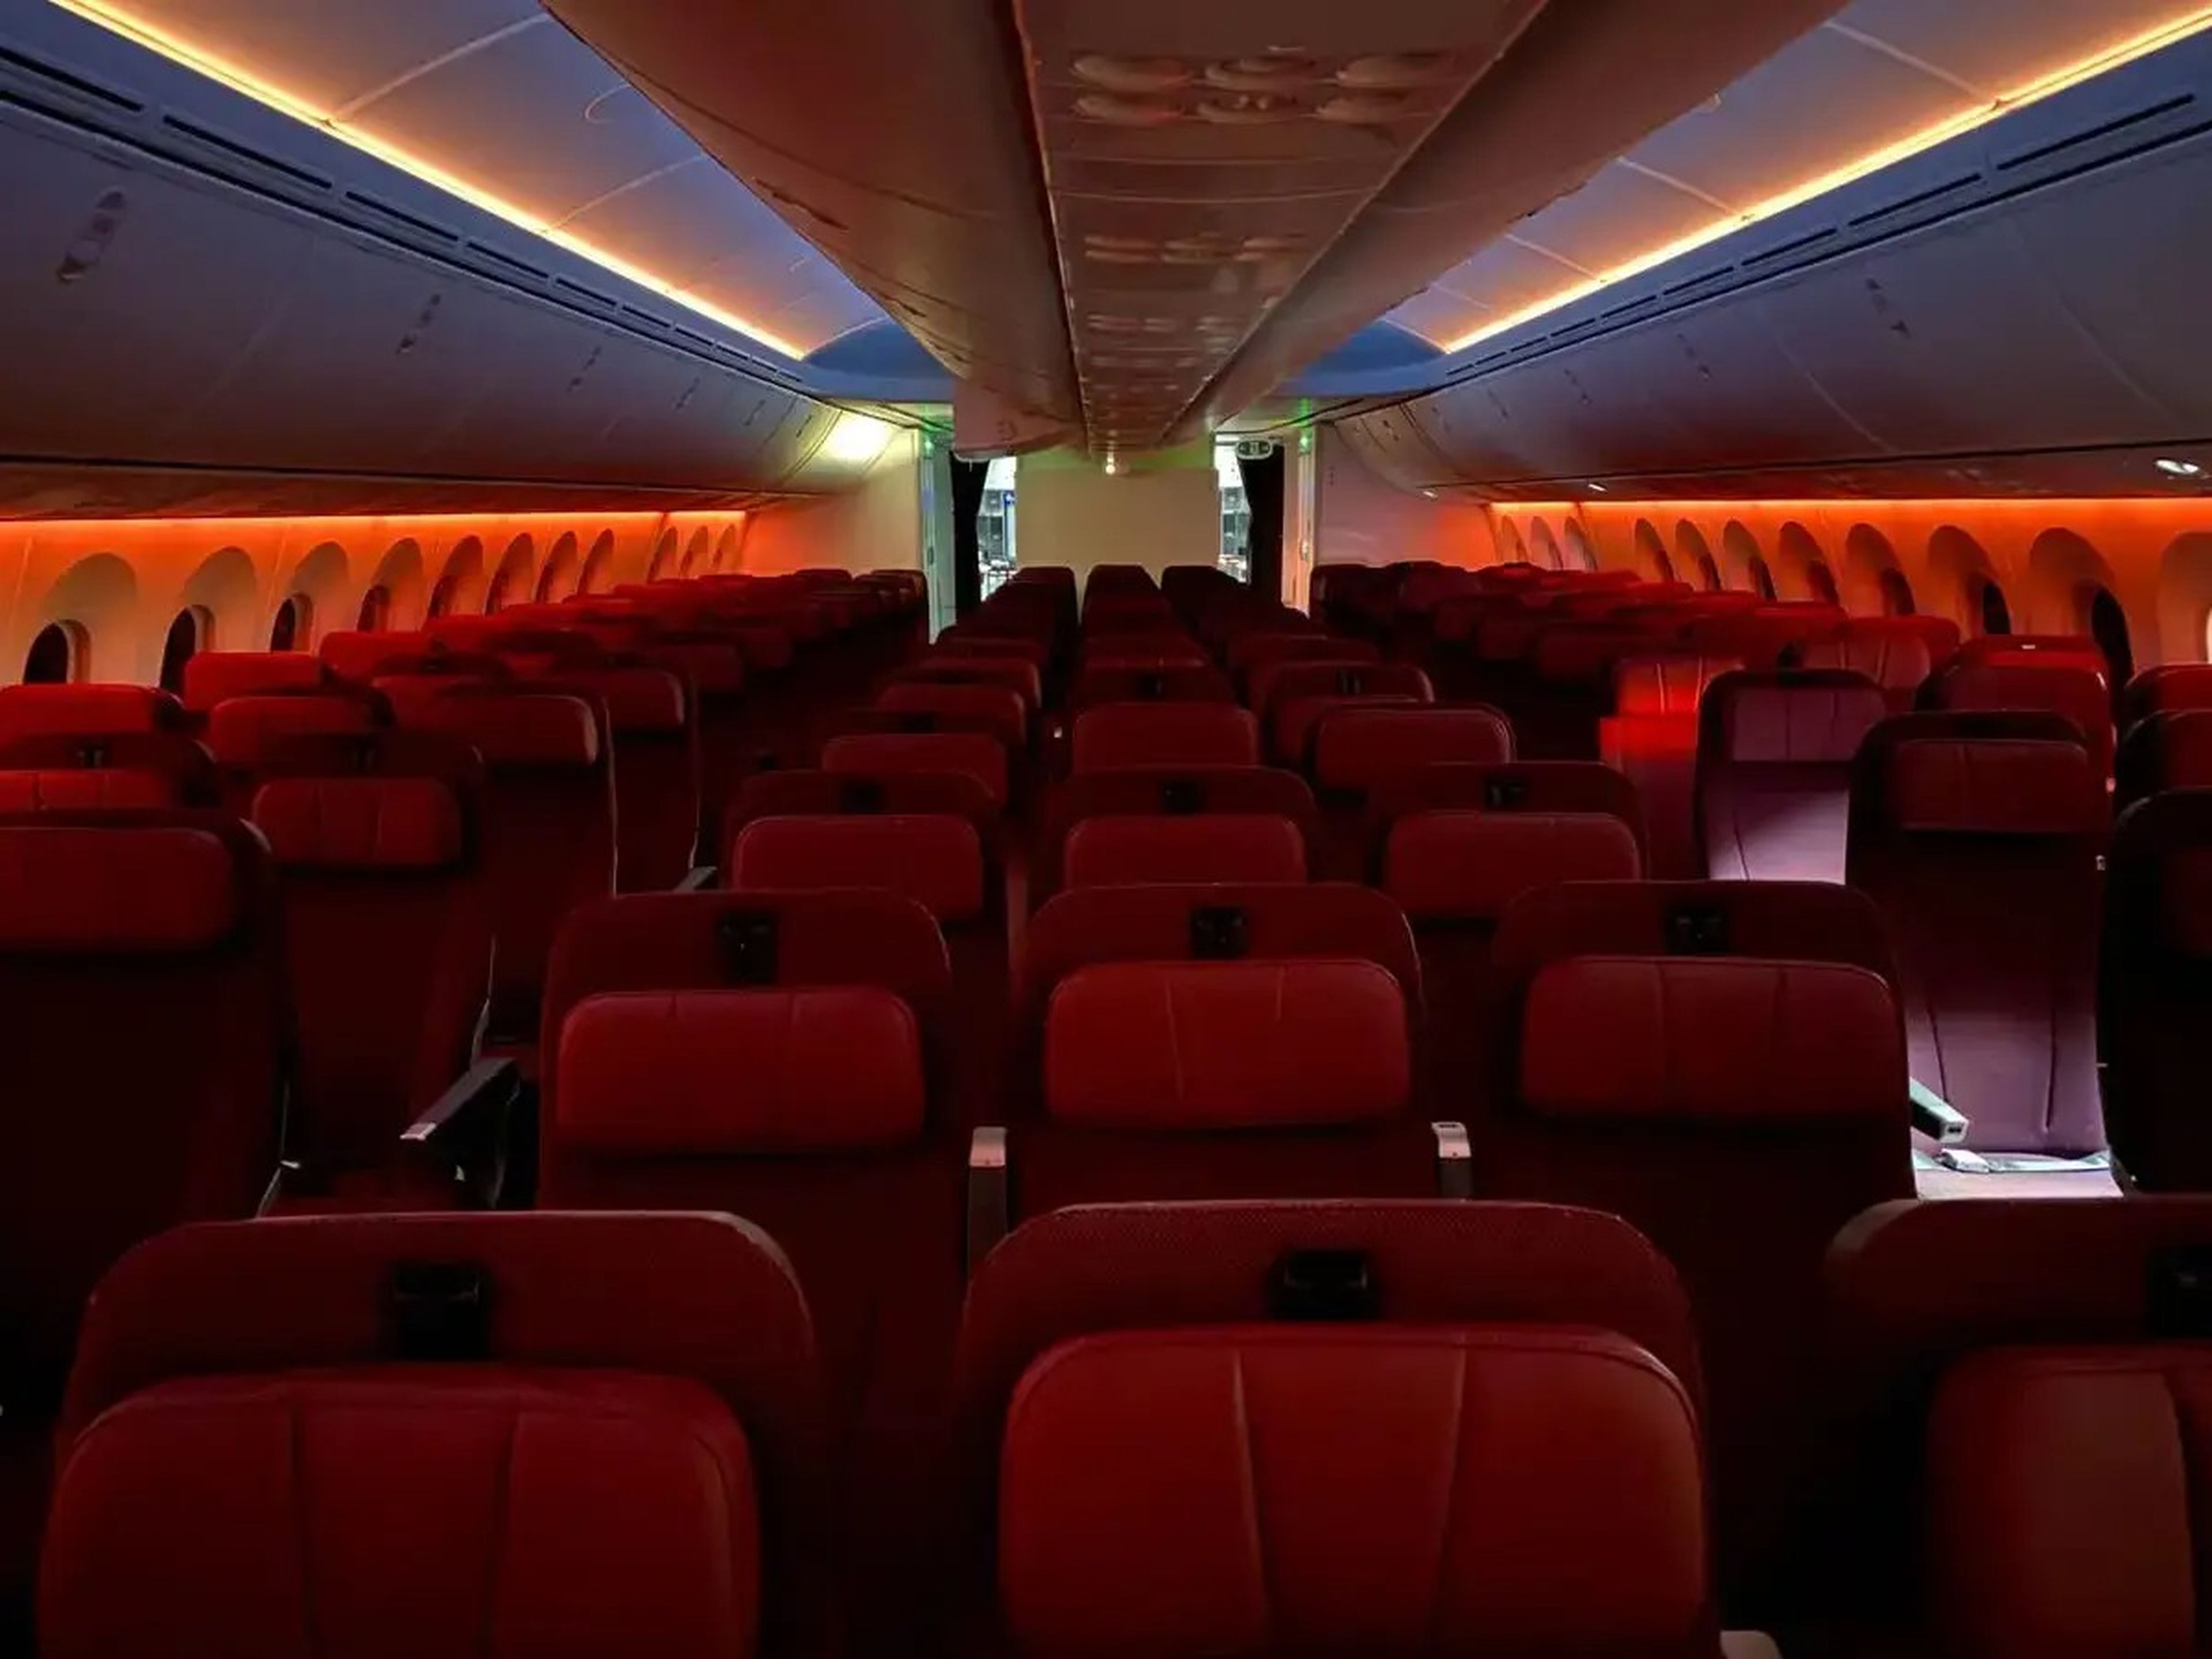 Red and orange lights dimmed above an empty row of seats on a plane.